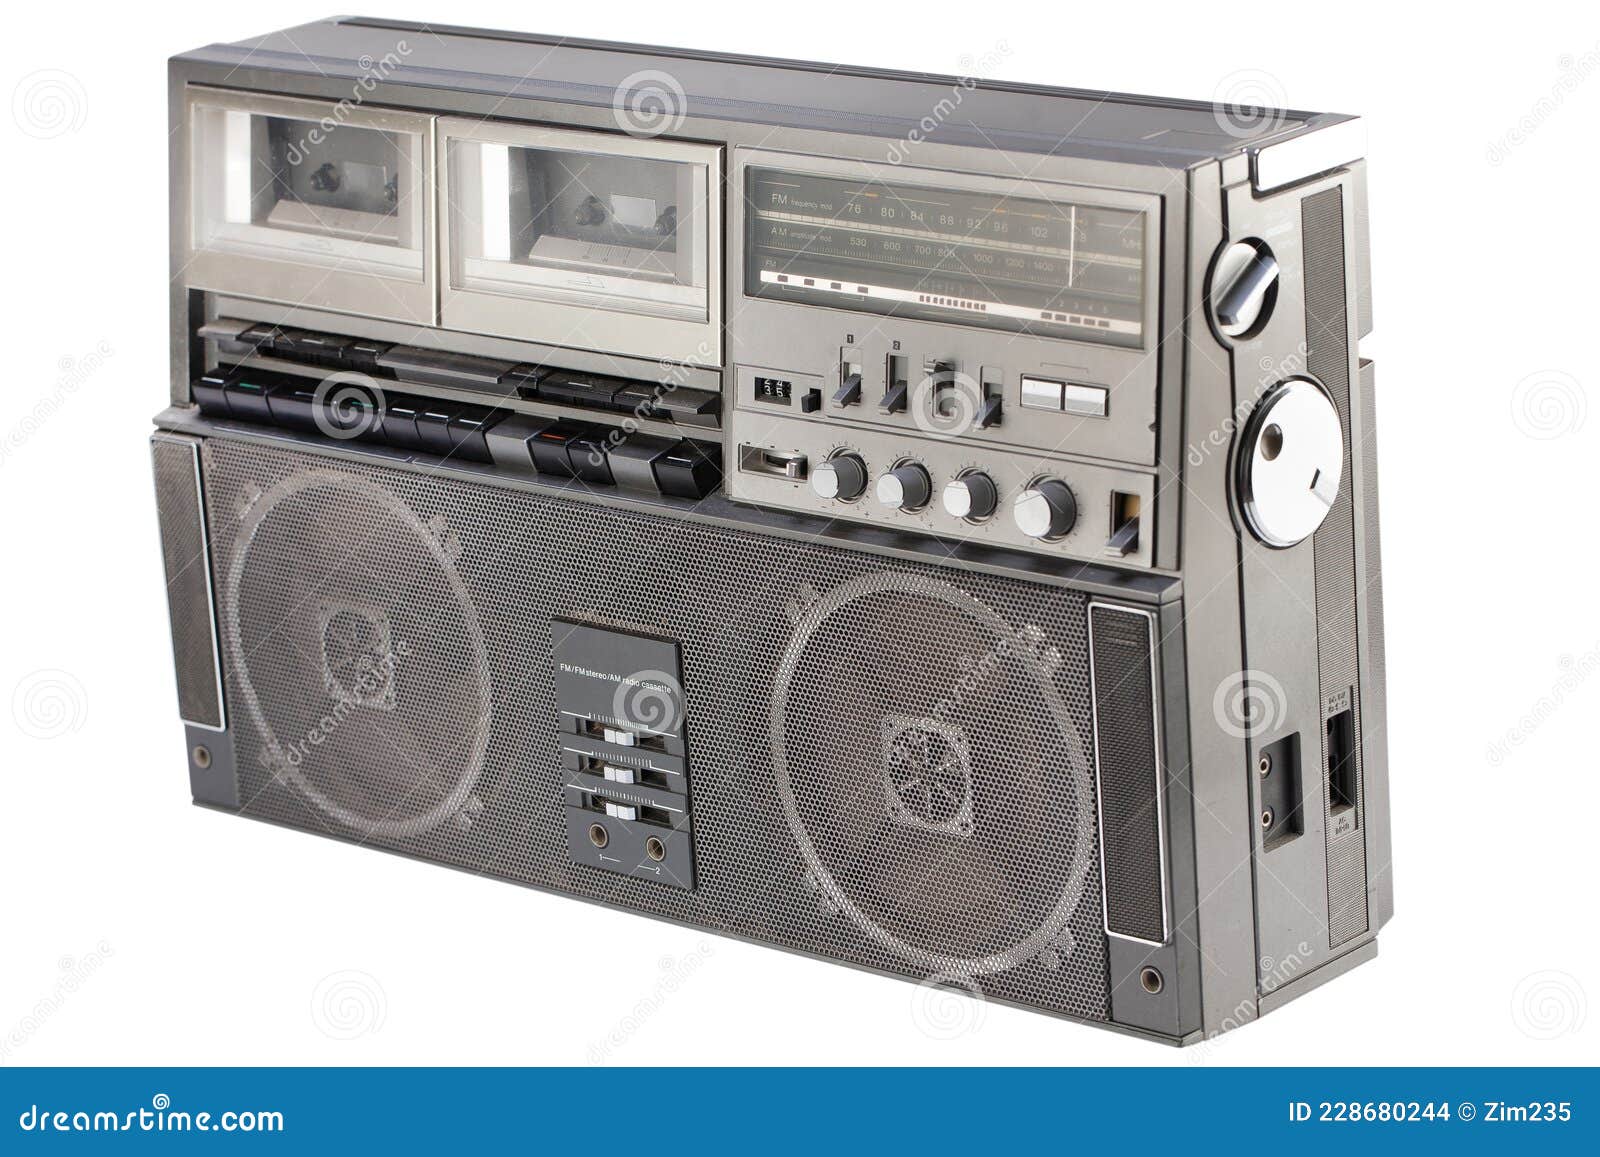 Portable radio cassette player made by the Sharp Corporation